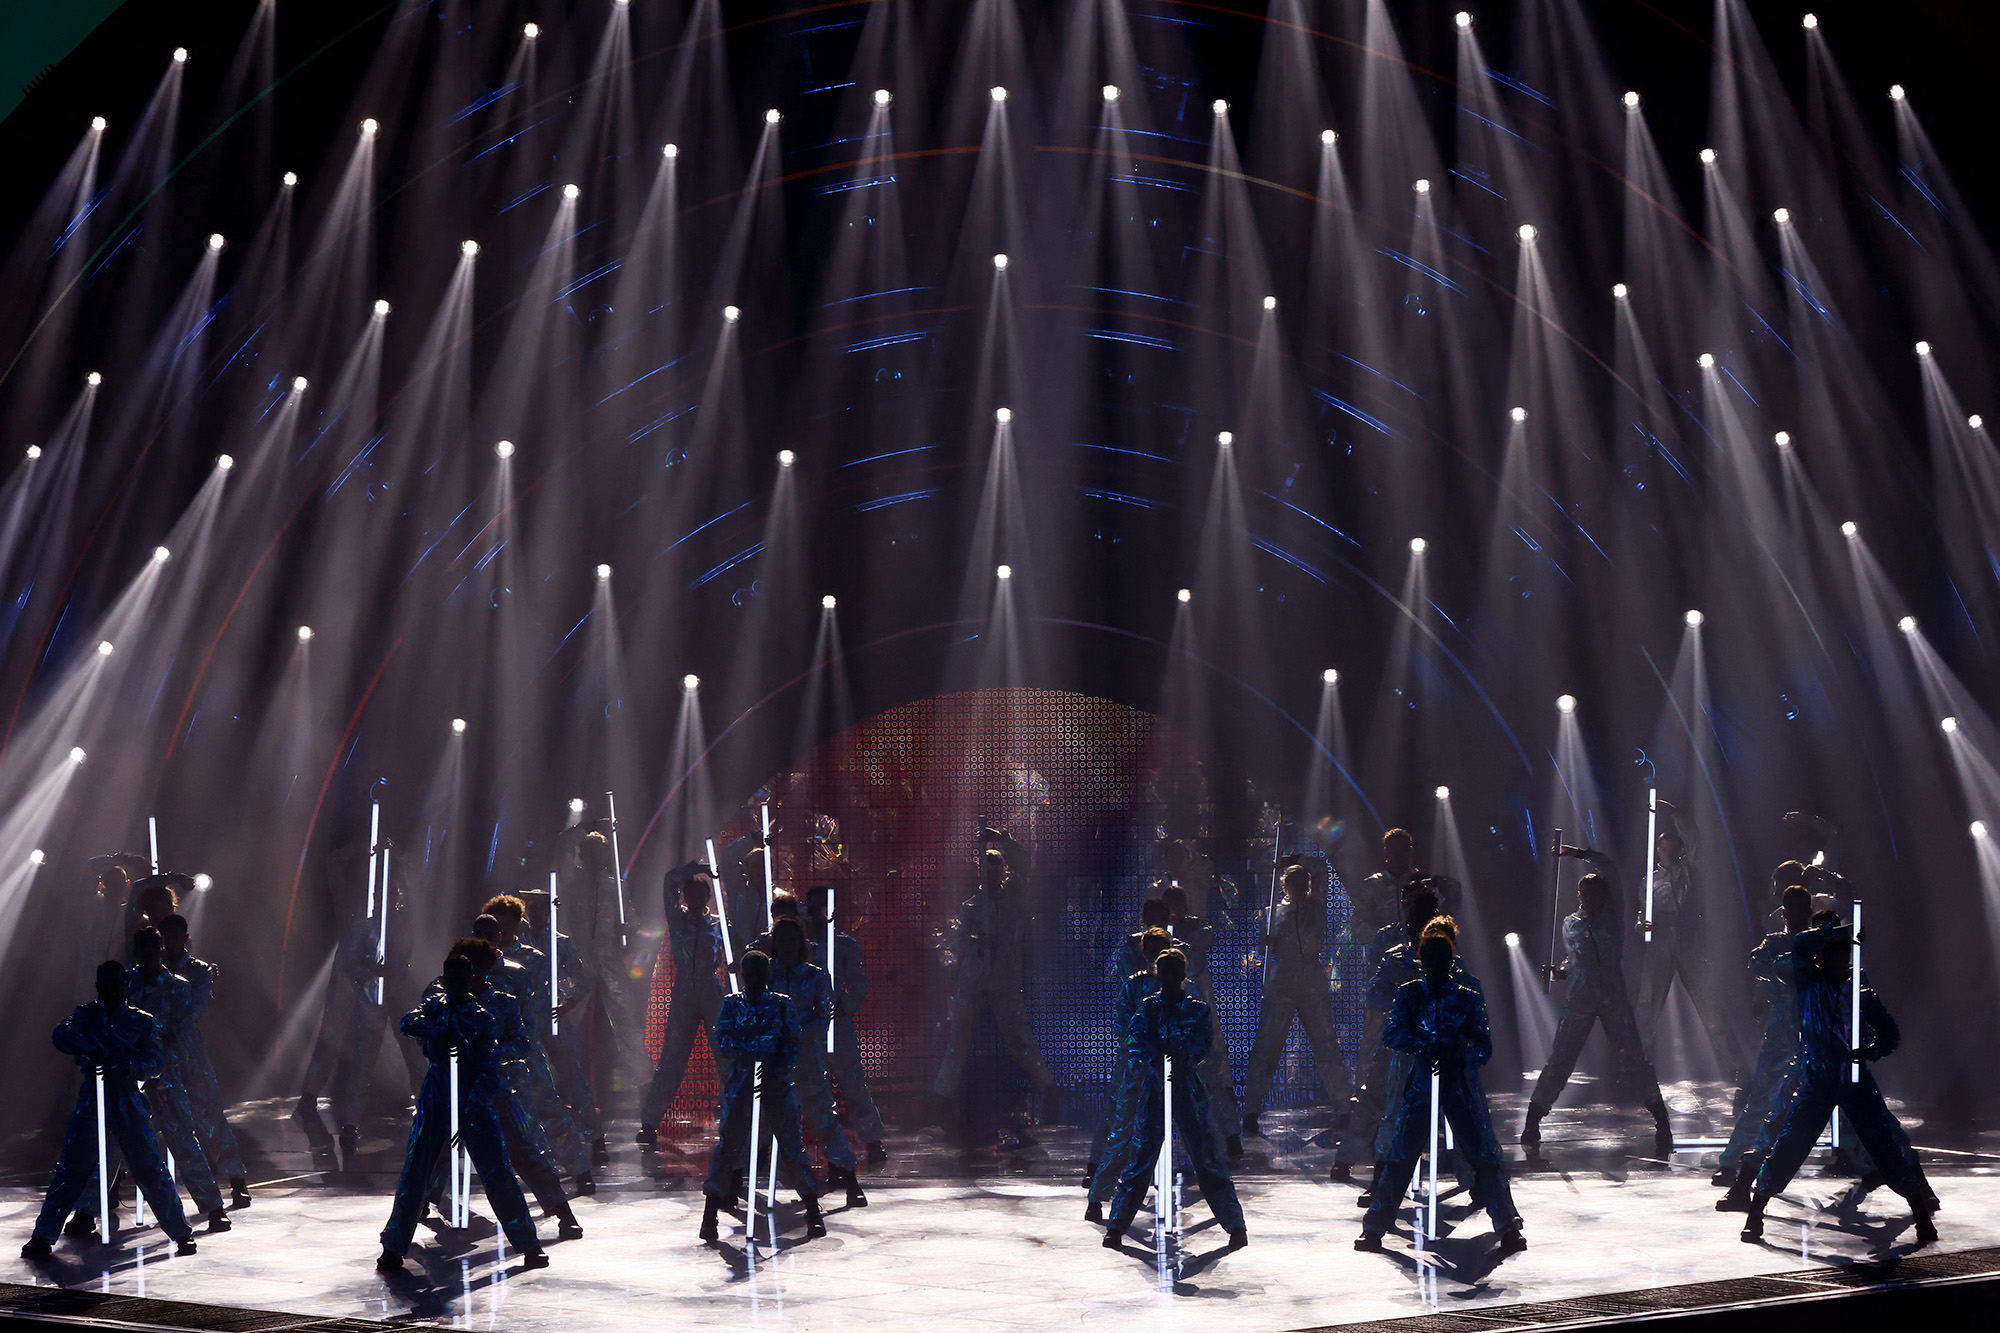  Eurovision Song Contest: What to know and how to watch